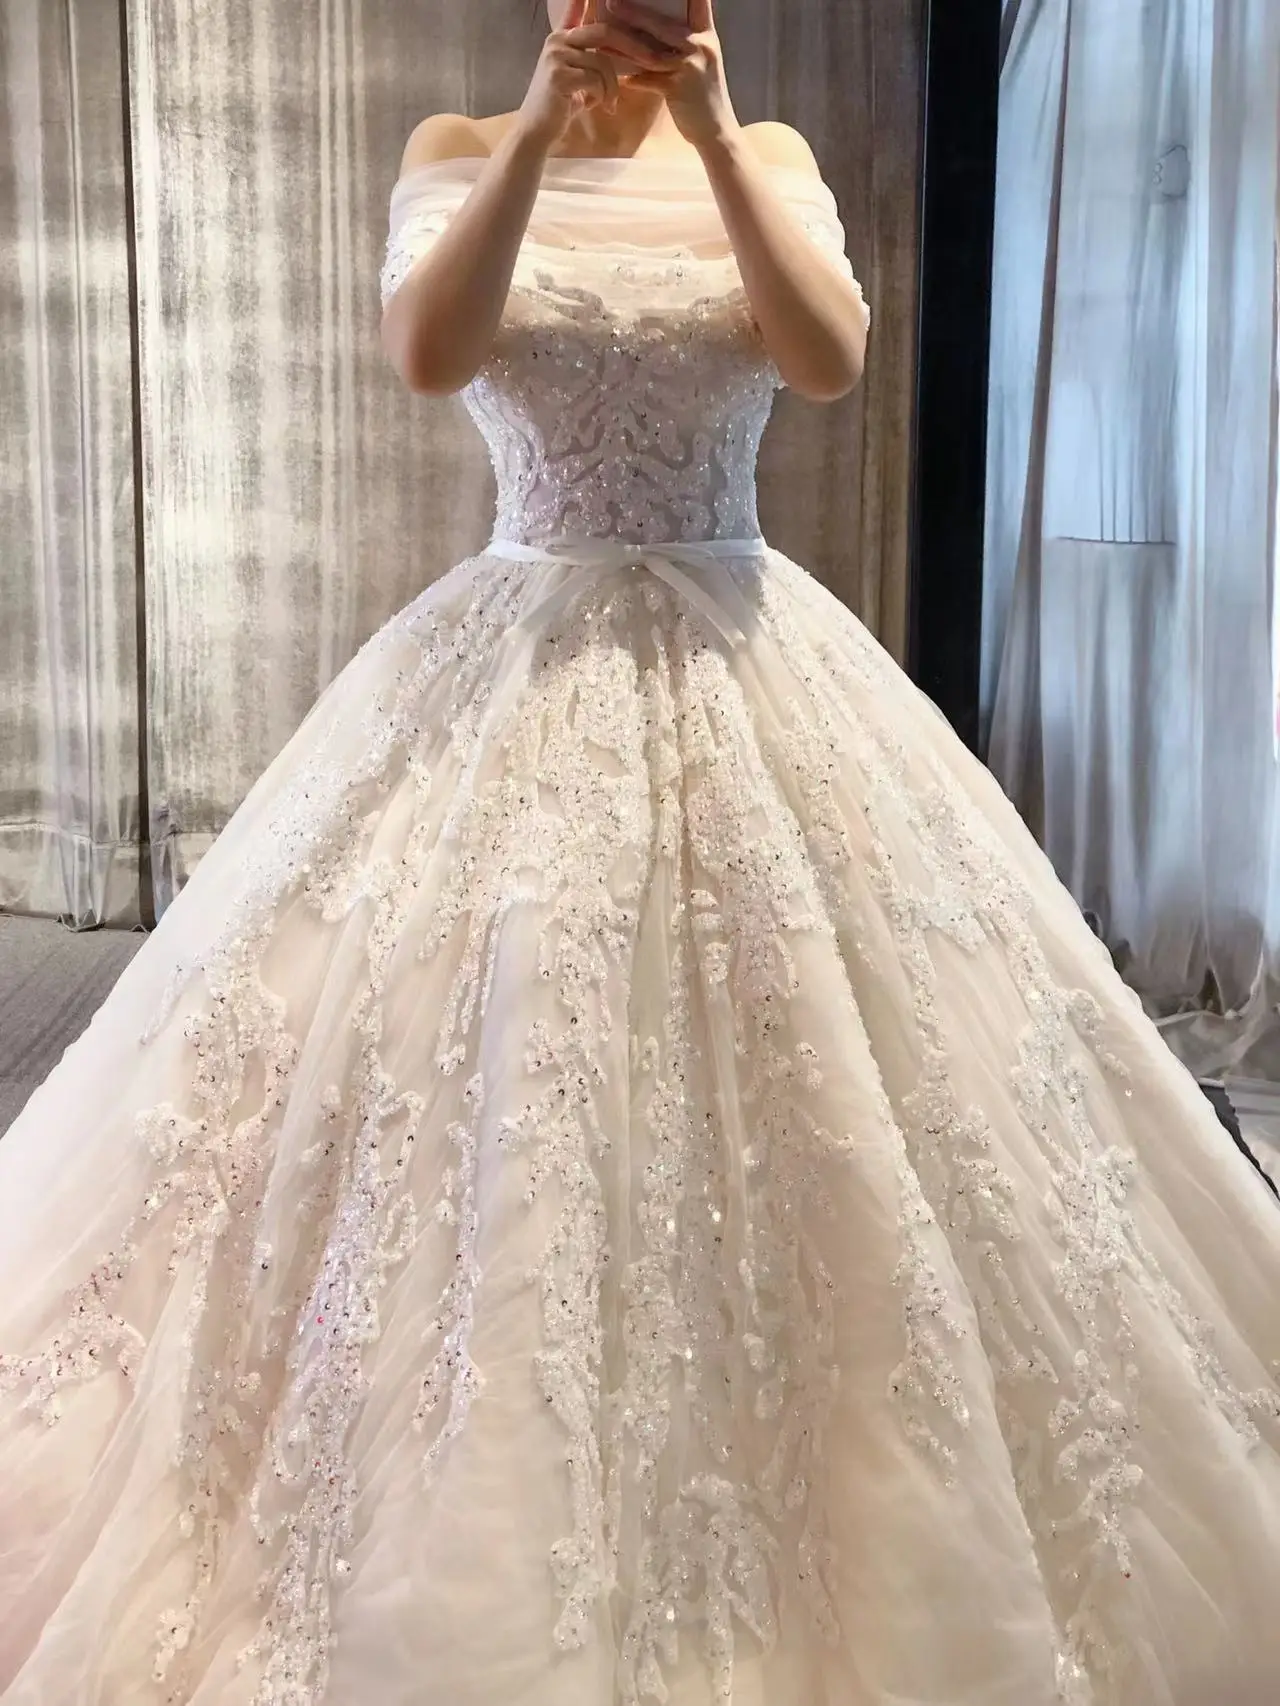 https://ae01.alicdn.com/kf/S042c85f273fe453fa81880323baea6a3x/Elie-Saab-Real-Picture-Off-the-Shoulder-Gorgeous-Embroidery-with-Beads-High-Quality-Custom-Made-Bridal.jpg